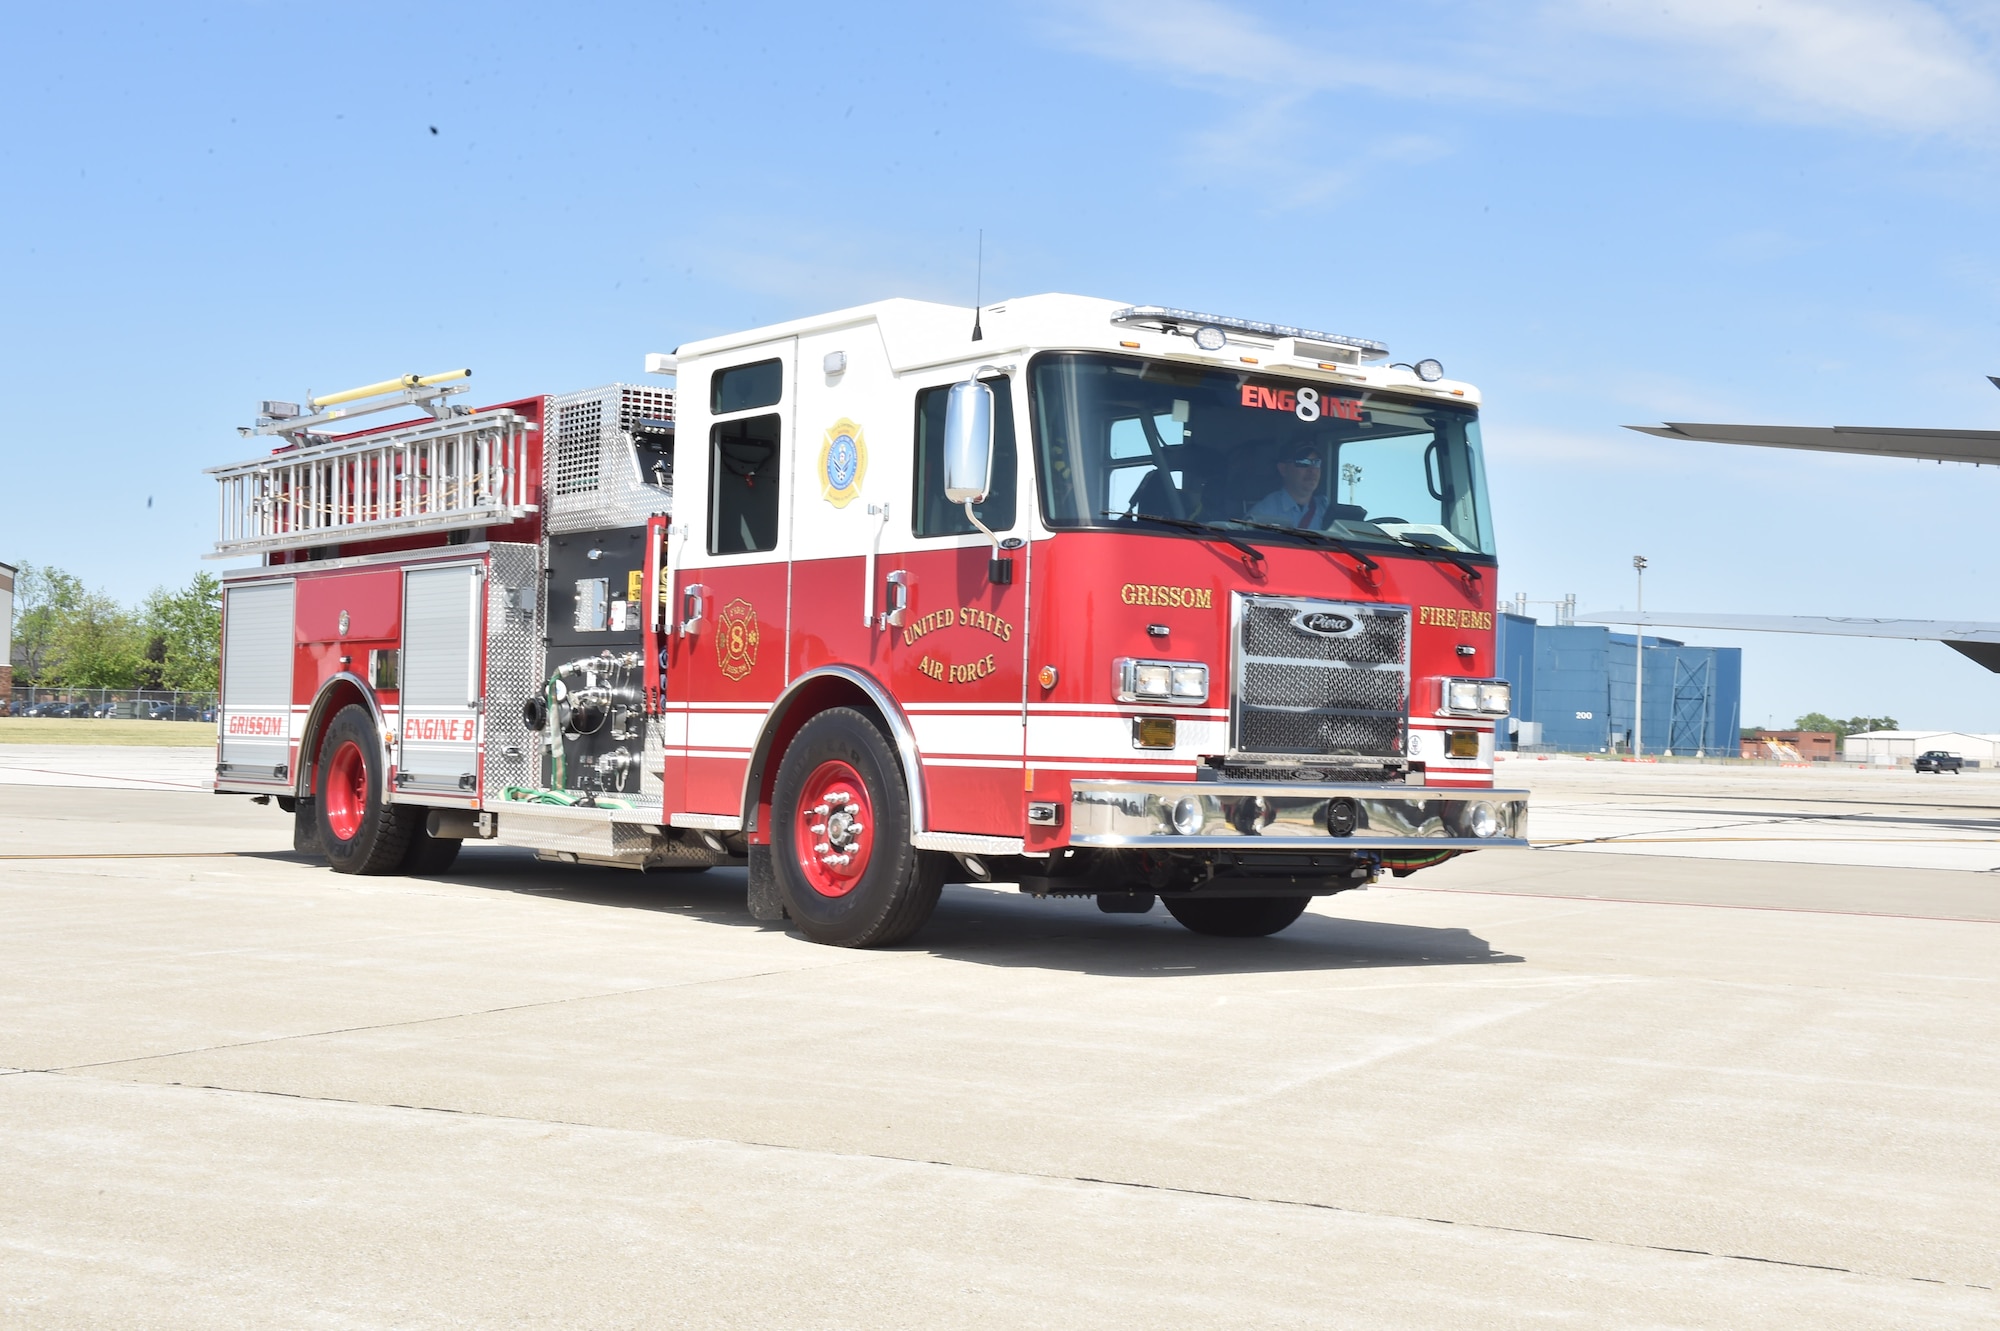 Grissom recently upgraded one of its fire engines to a newer model. The improved vehicle has increased storage capacity, as well as a more advanced and eco-friendly engine. (U.S. Air Force photo / Tech Sgt. Jami Lancette)